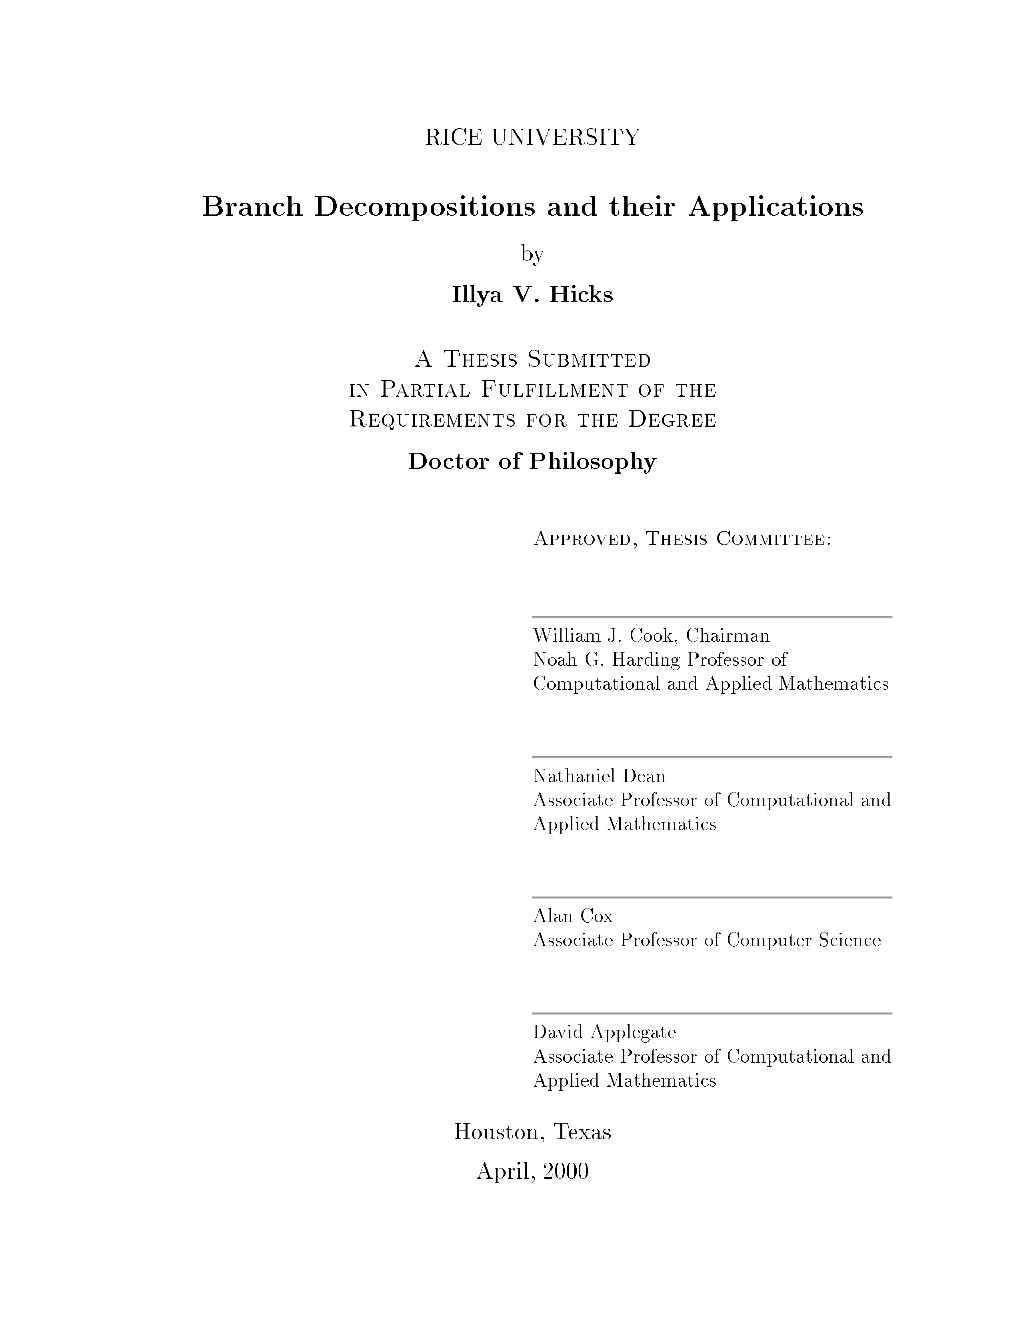 Branch Decompositions and Their Applications